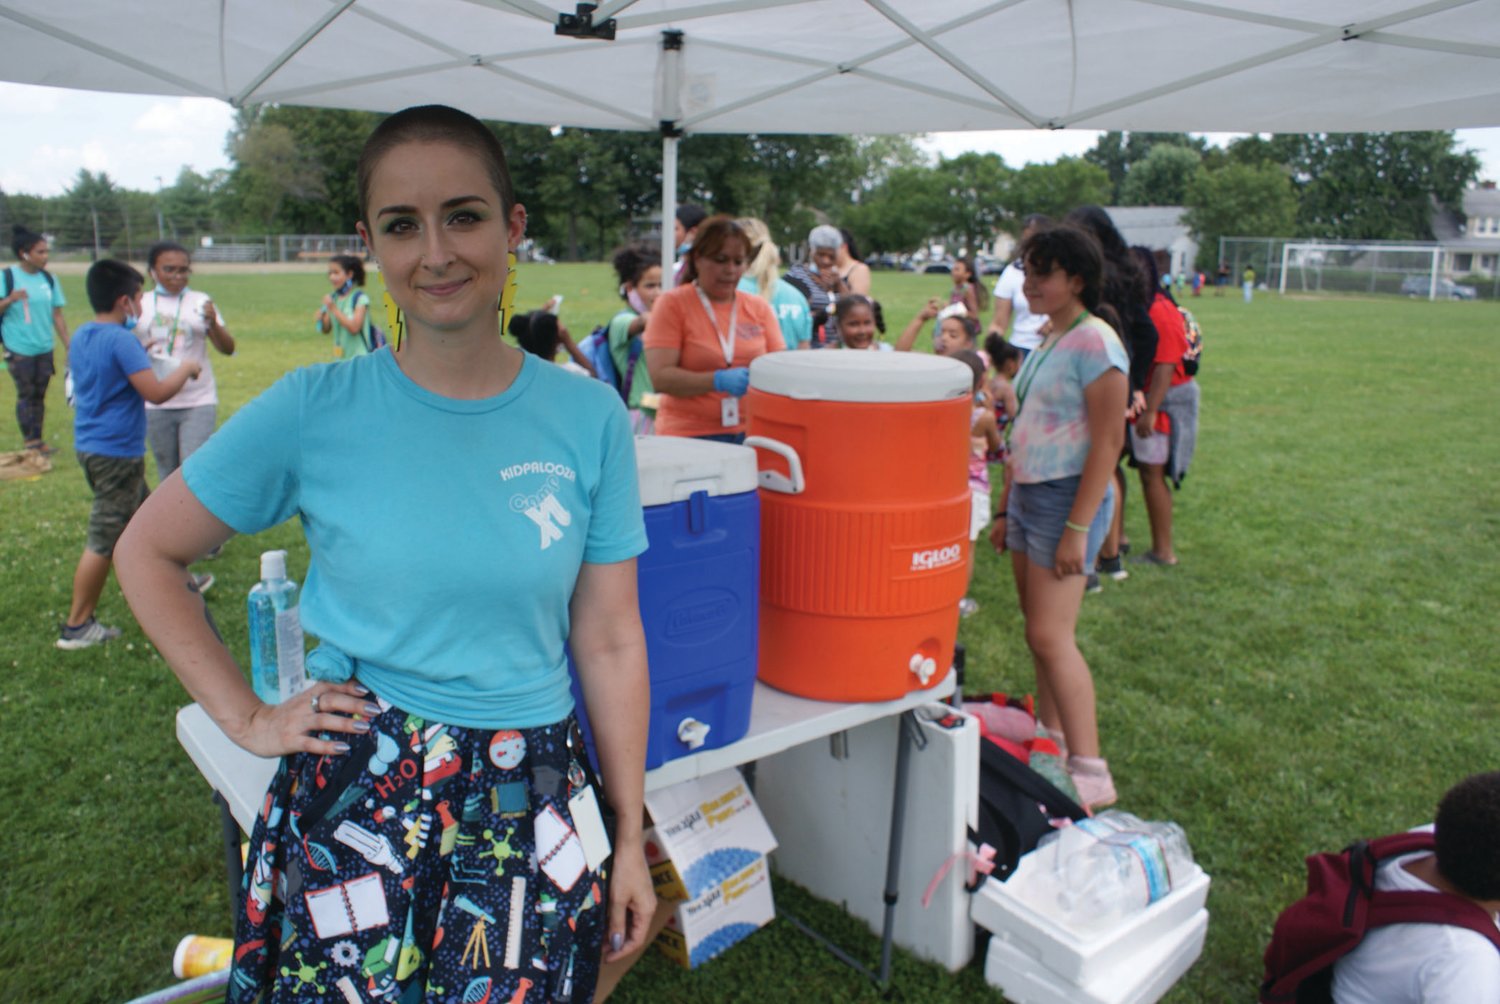 RUNNING THE SHOW: Pictured is Sarah DeCosta, program director for Camp XL, at Bain Middle School’s Tate Field during Kidpalooza last week. 